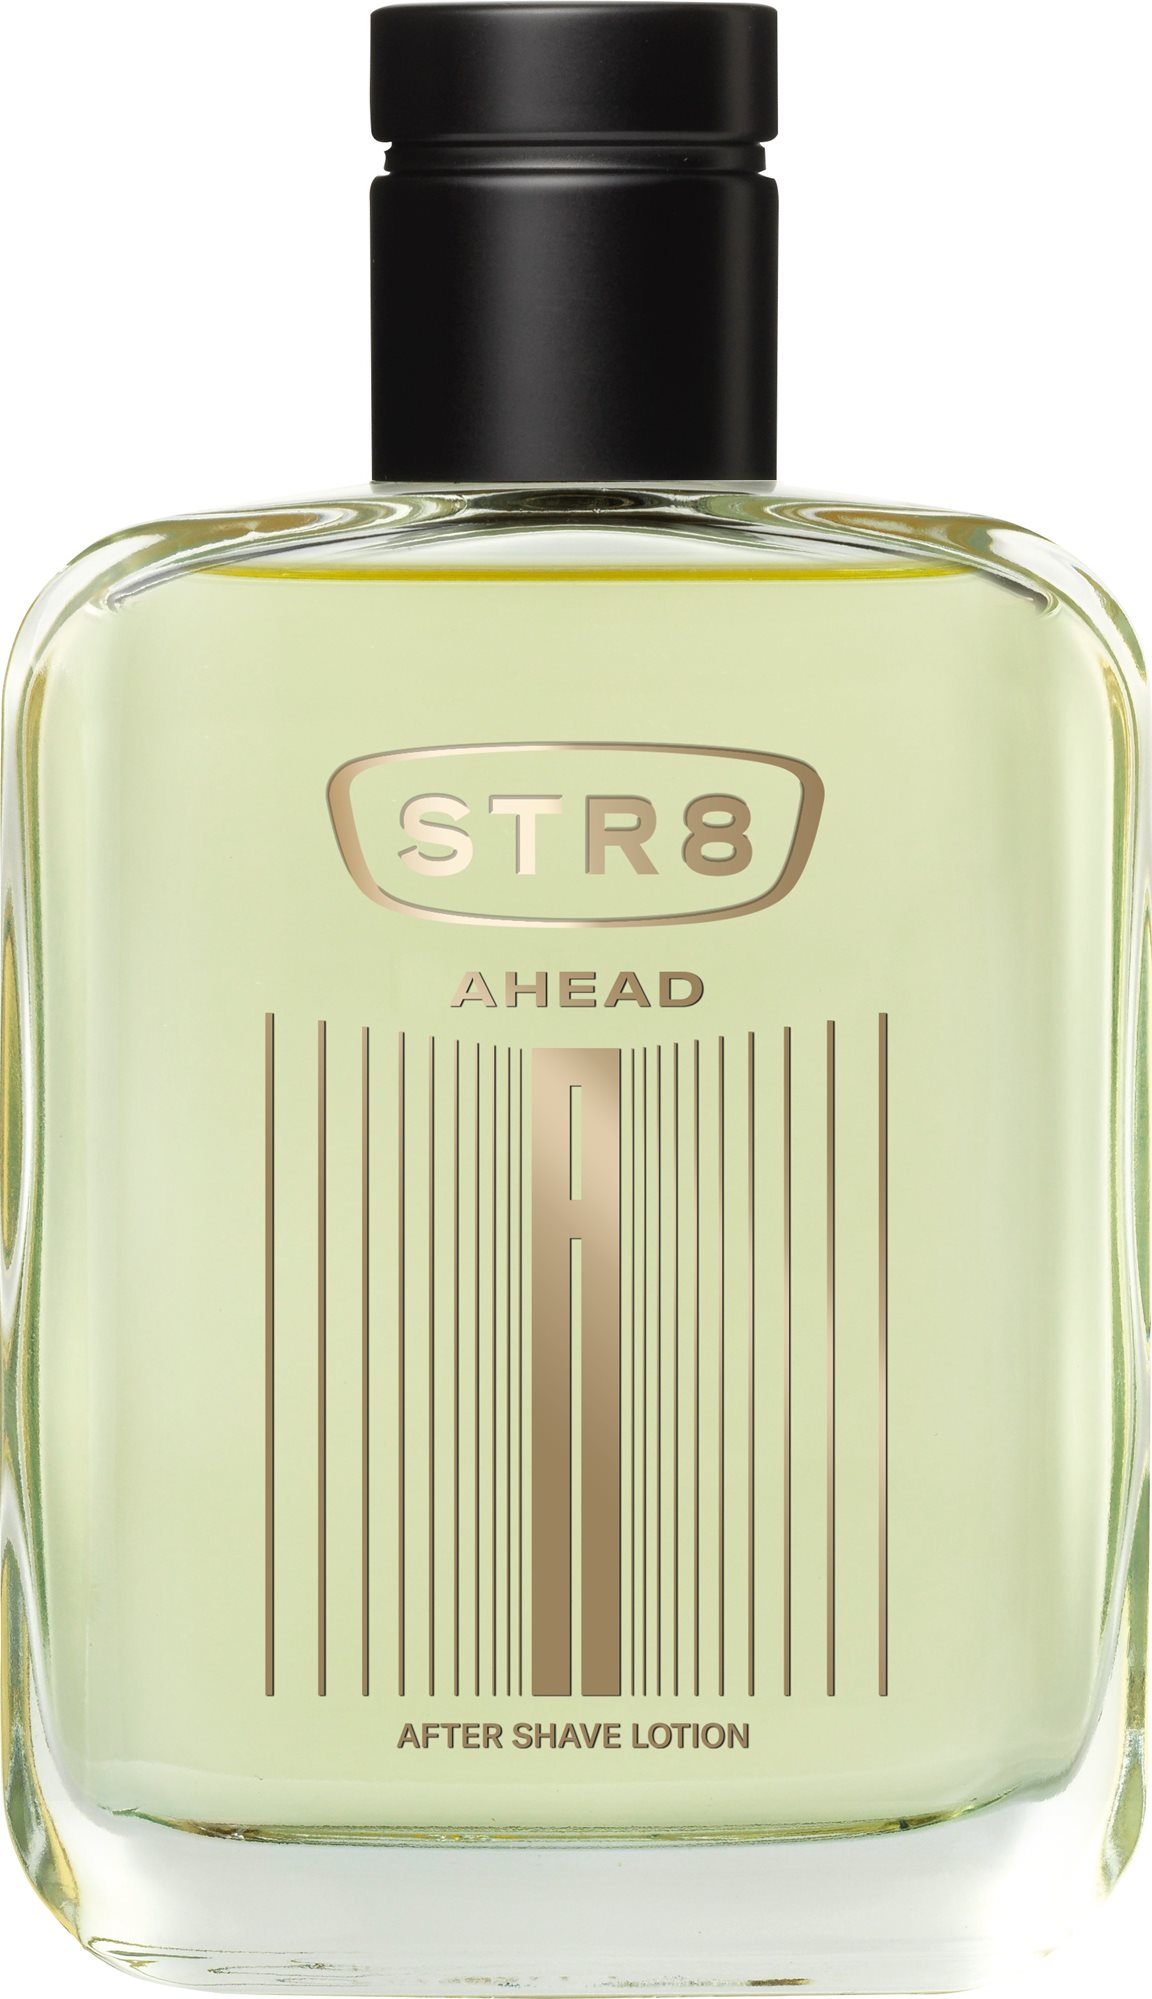 Aftershave STR8 Ahead 100 ml